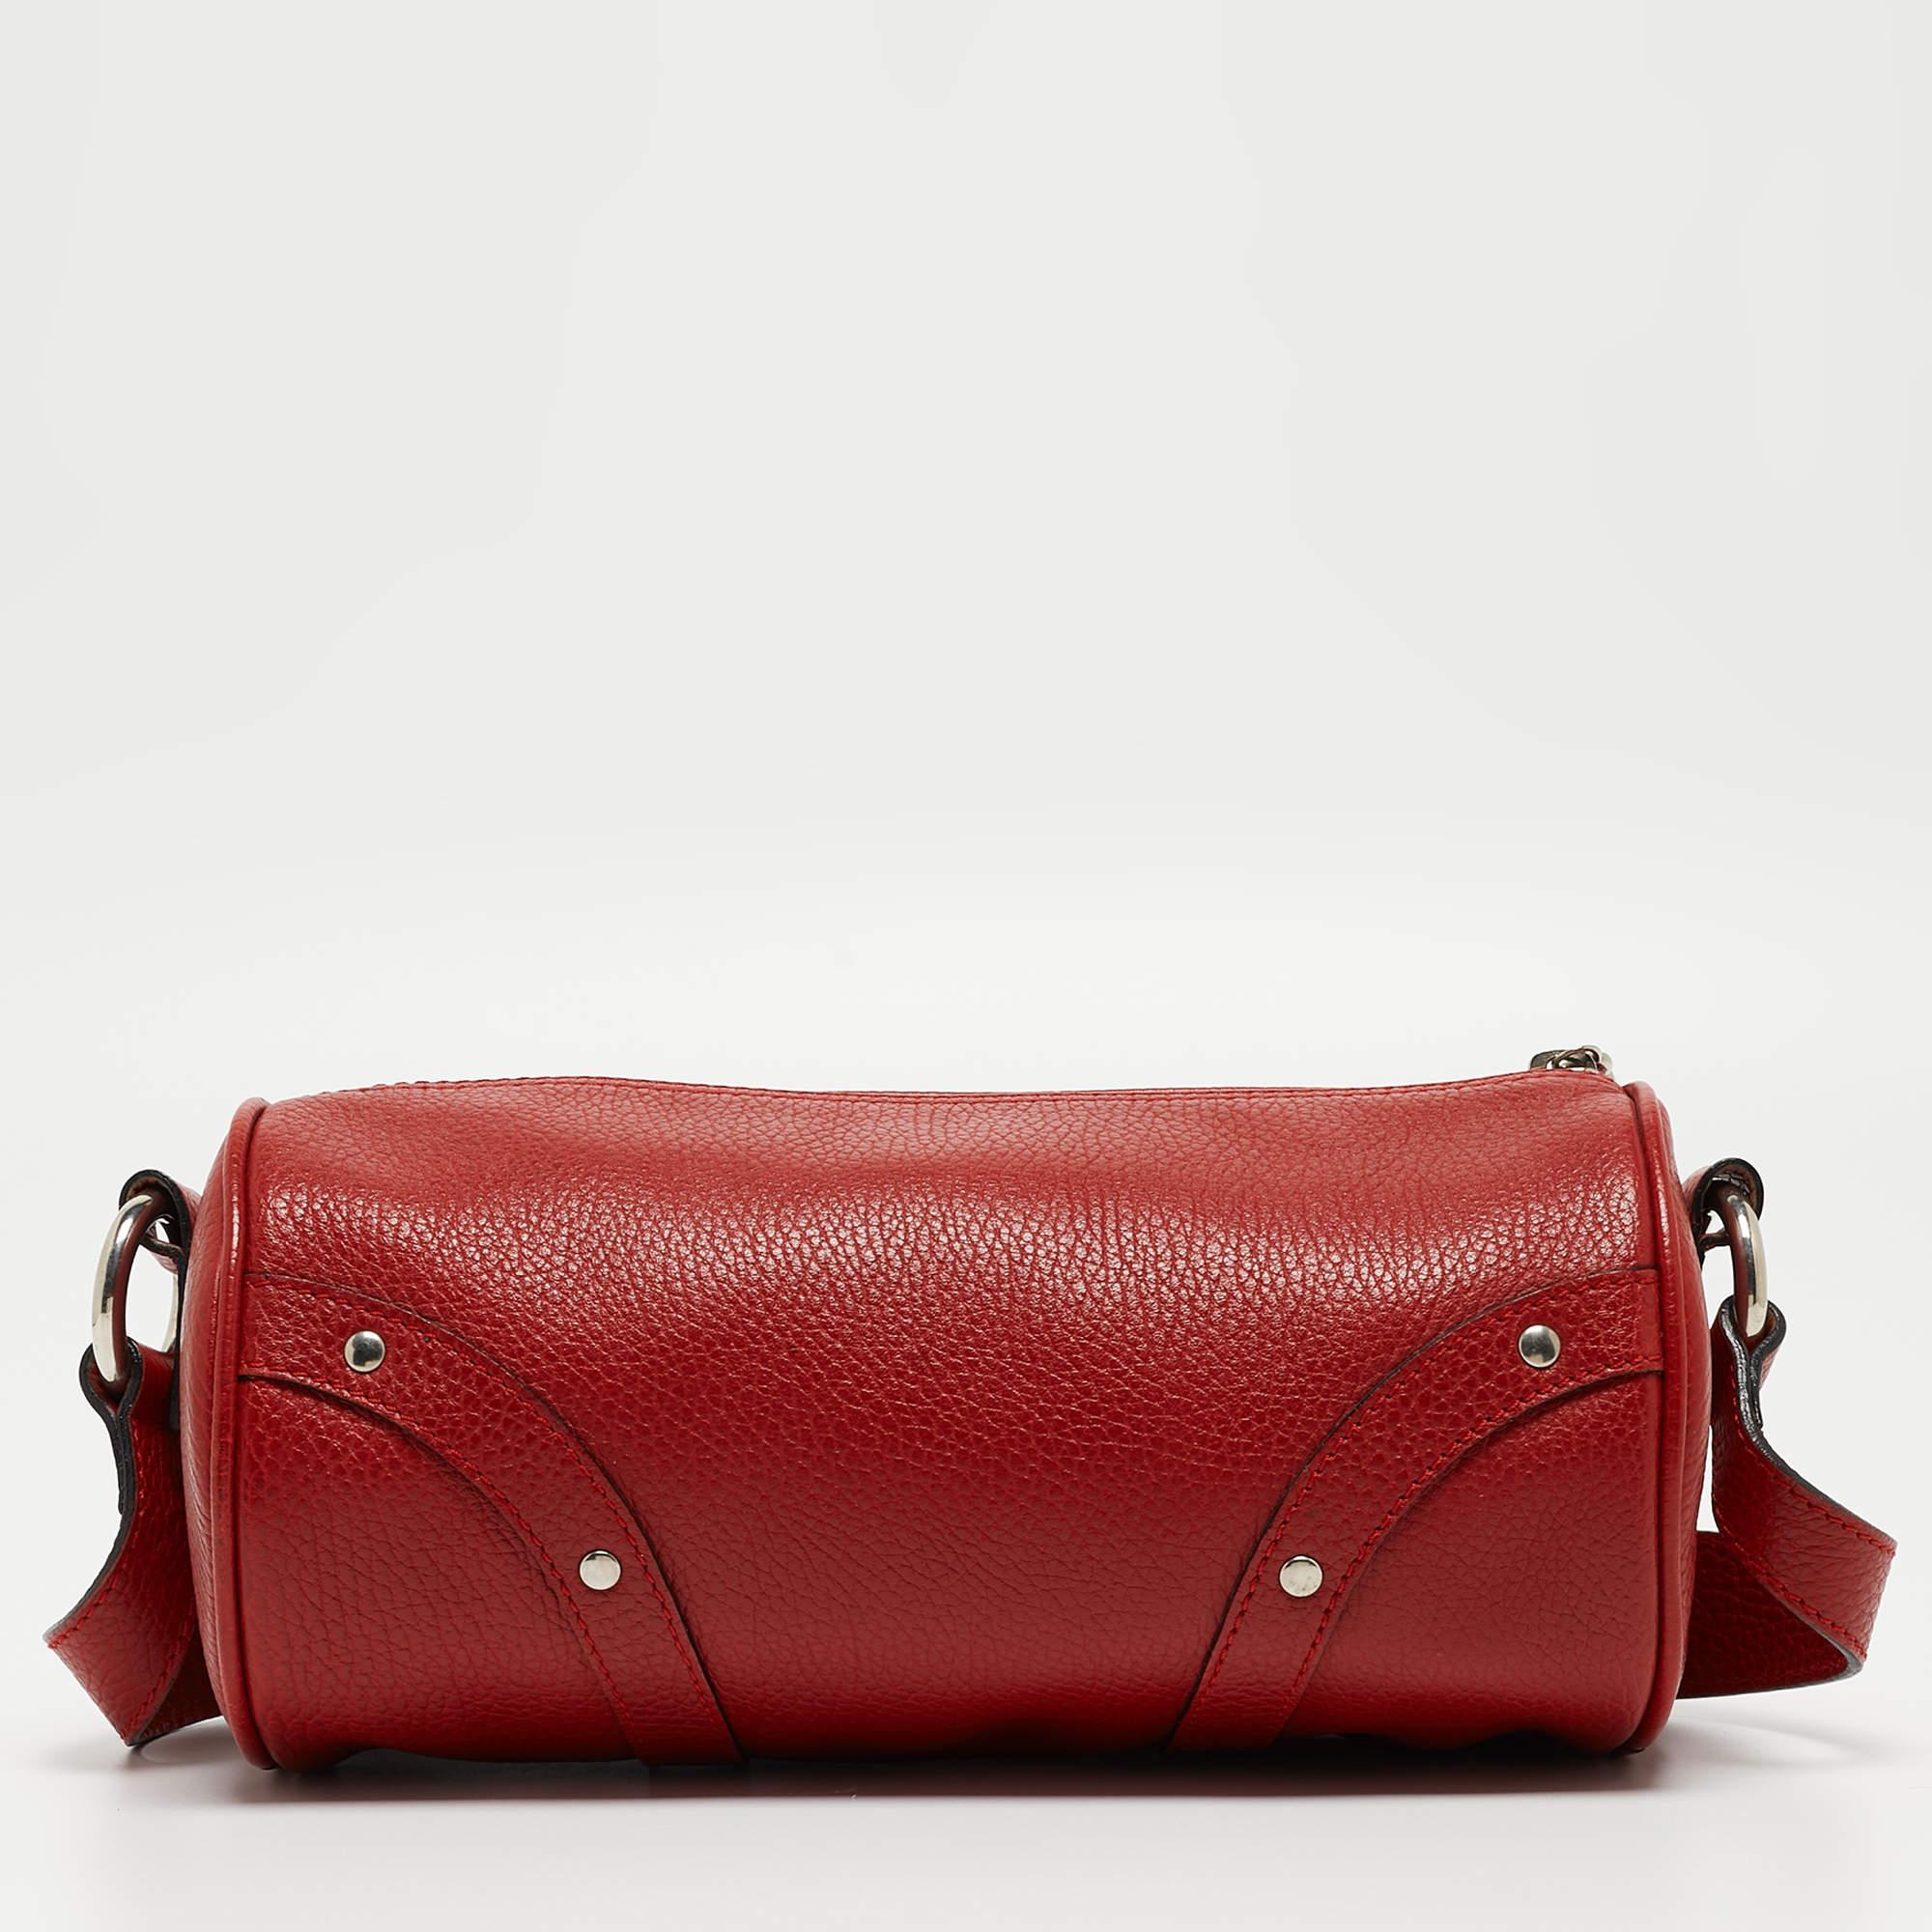 This functional Barrel bag by Burberry comes crafted from leather and features a cylindrical design with a top zip closure, a single strap, and a fabric interior to house your essentials.

